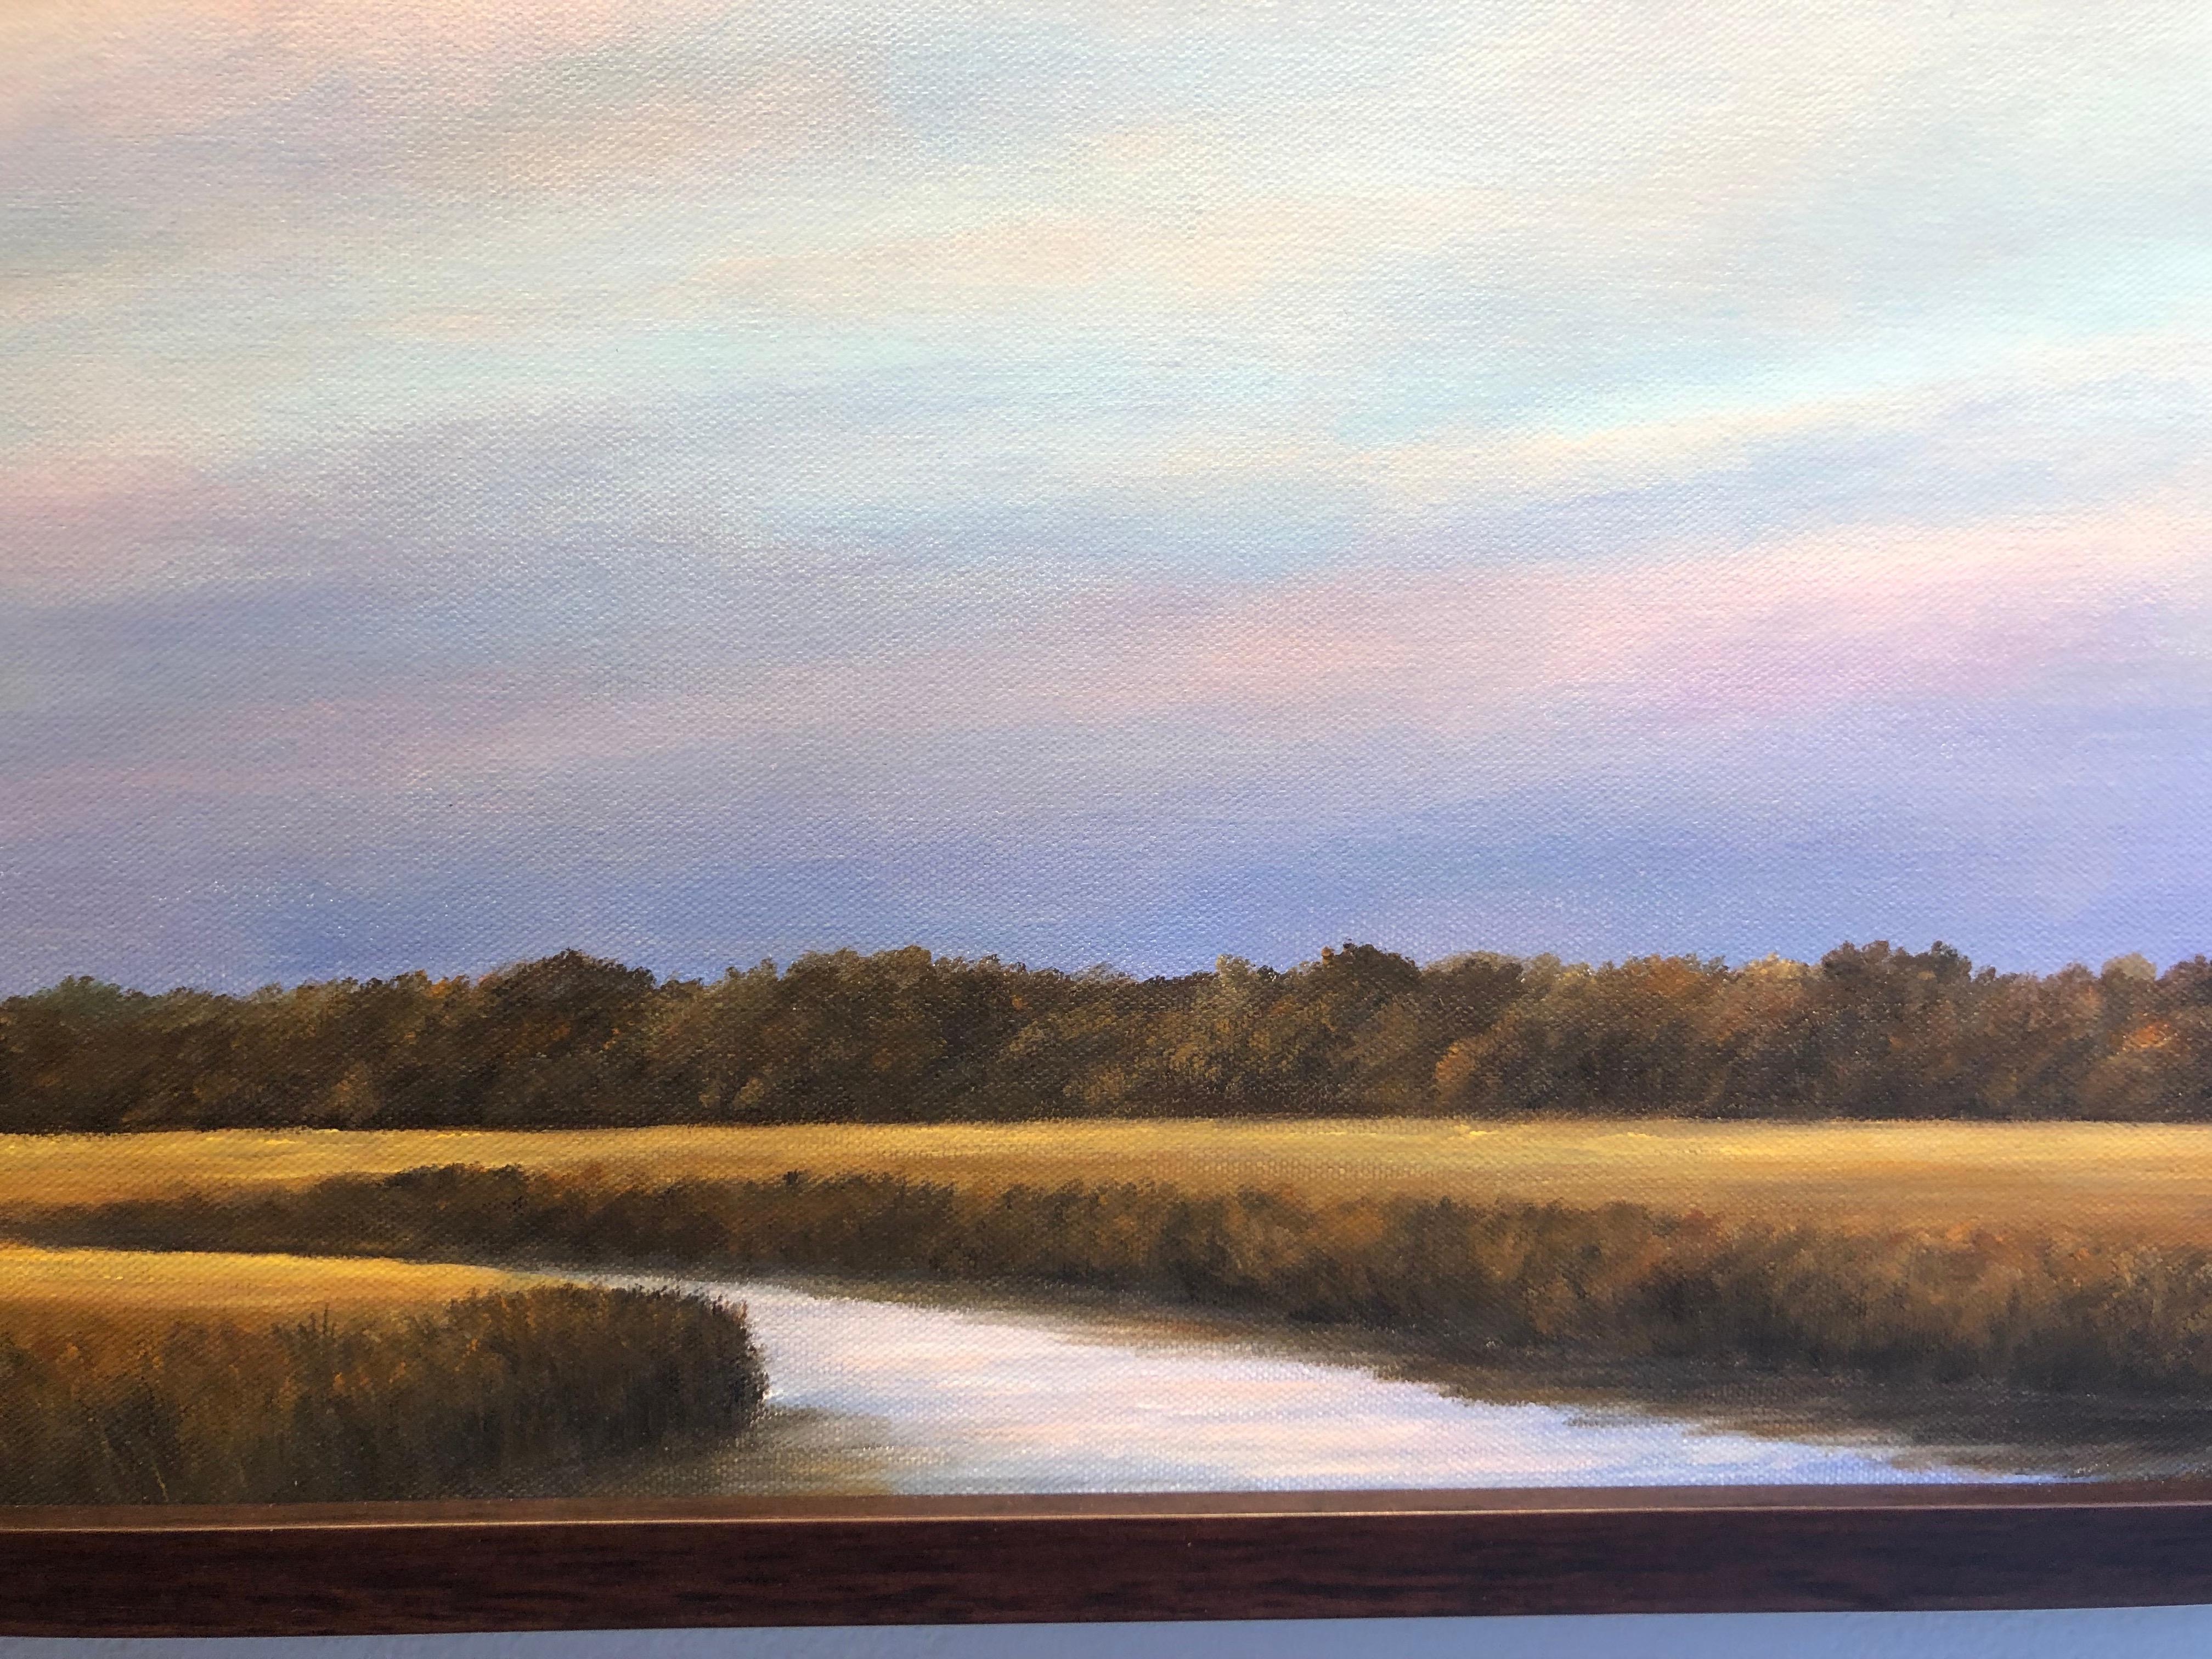 A Creek Runs Through it - Original Oil Painting with Dramatic Sky and Landscape 1